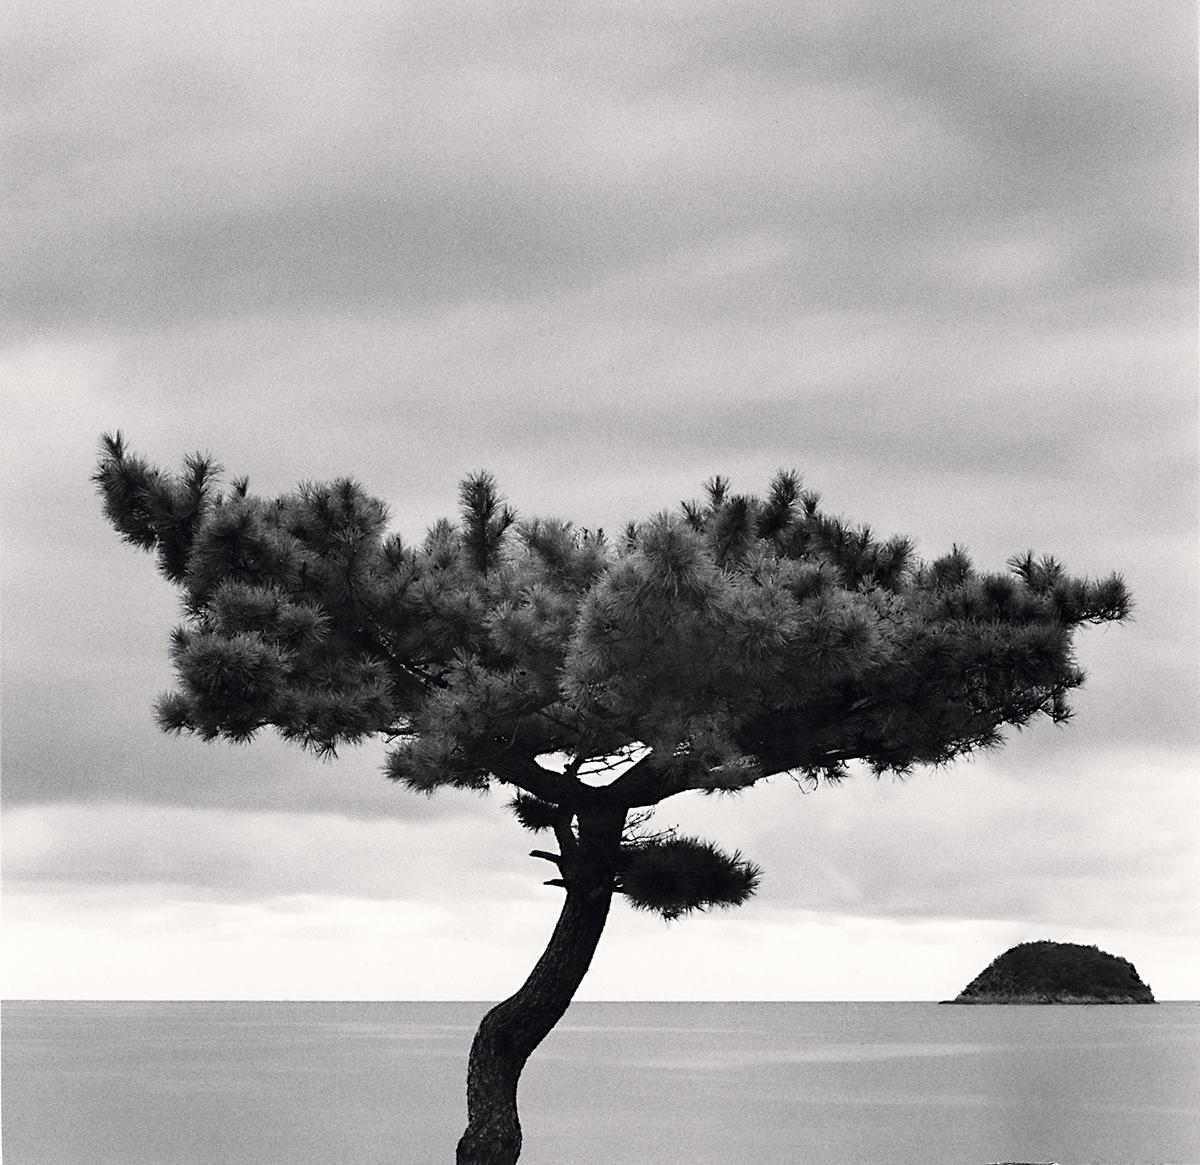 Pine Tree and Nago Island, Tsuda, Shikoku, Japan by Michael Kenna presents a lone pine tree, standing in front of the ocean. A small island appears in the horizon, mimicking the shape of the tree. 

Pine Tree and Nago Island, Tsuda, Shikoku, Japan